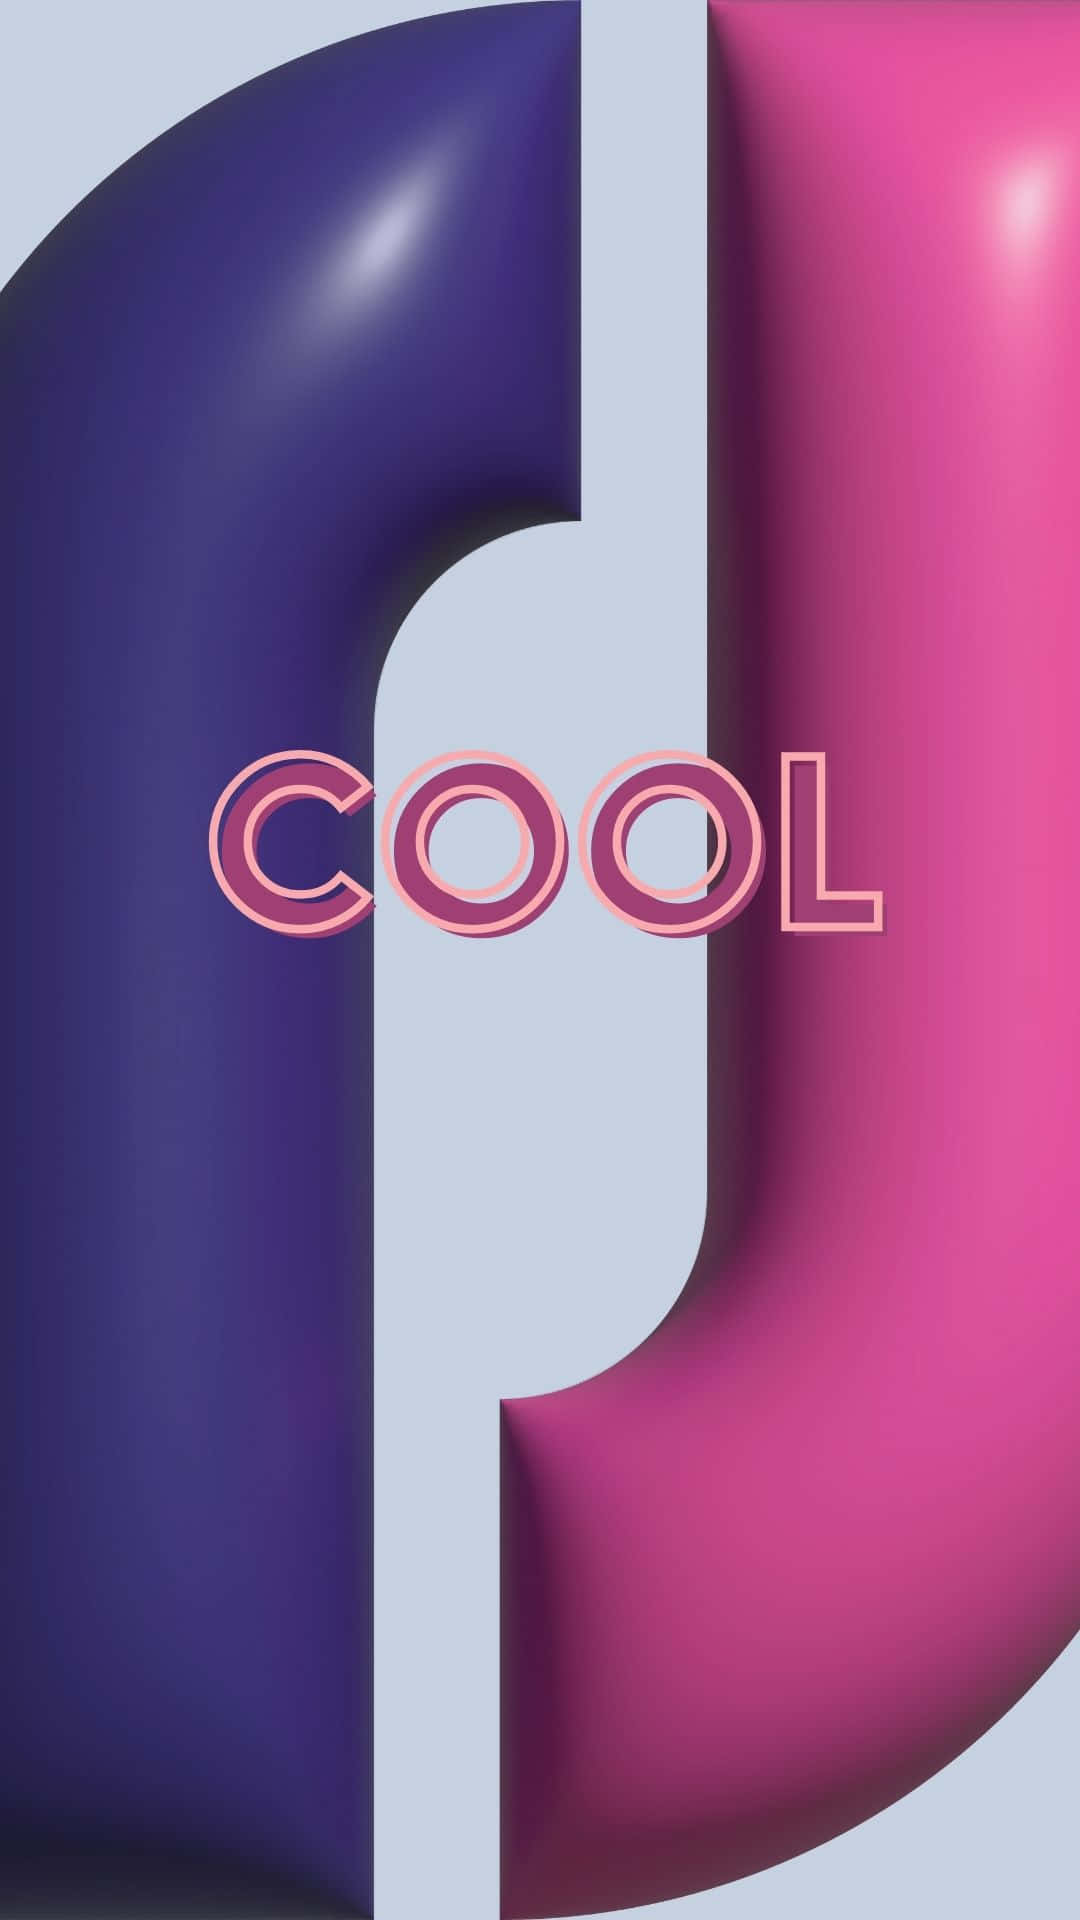 Stay Cool! Background